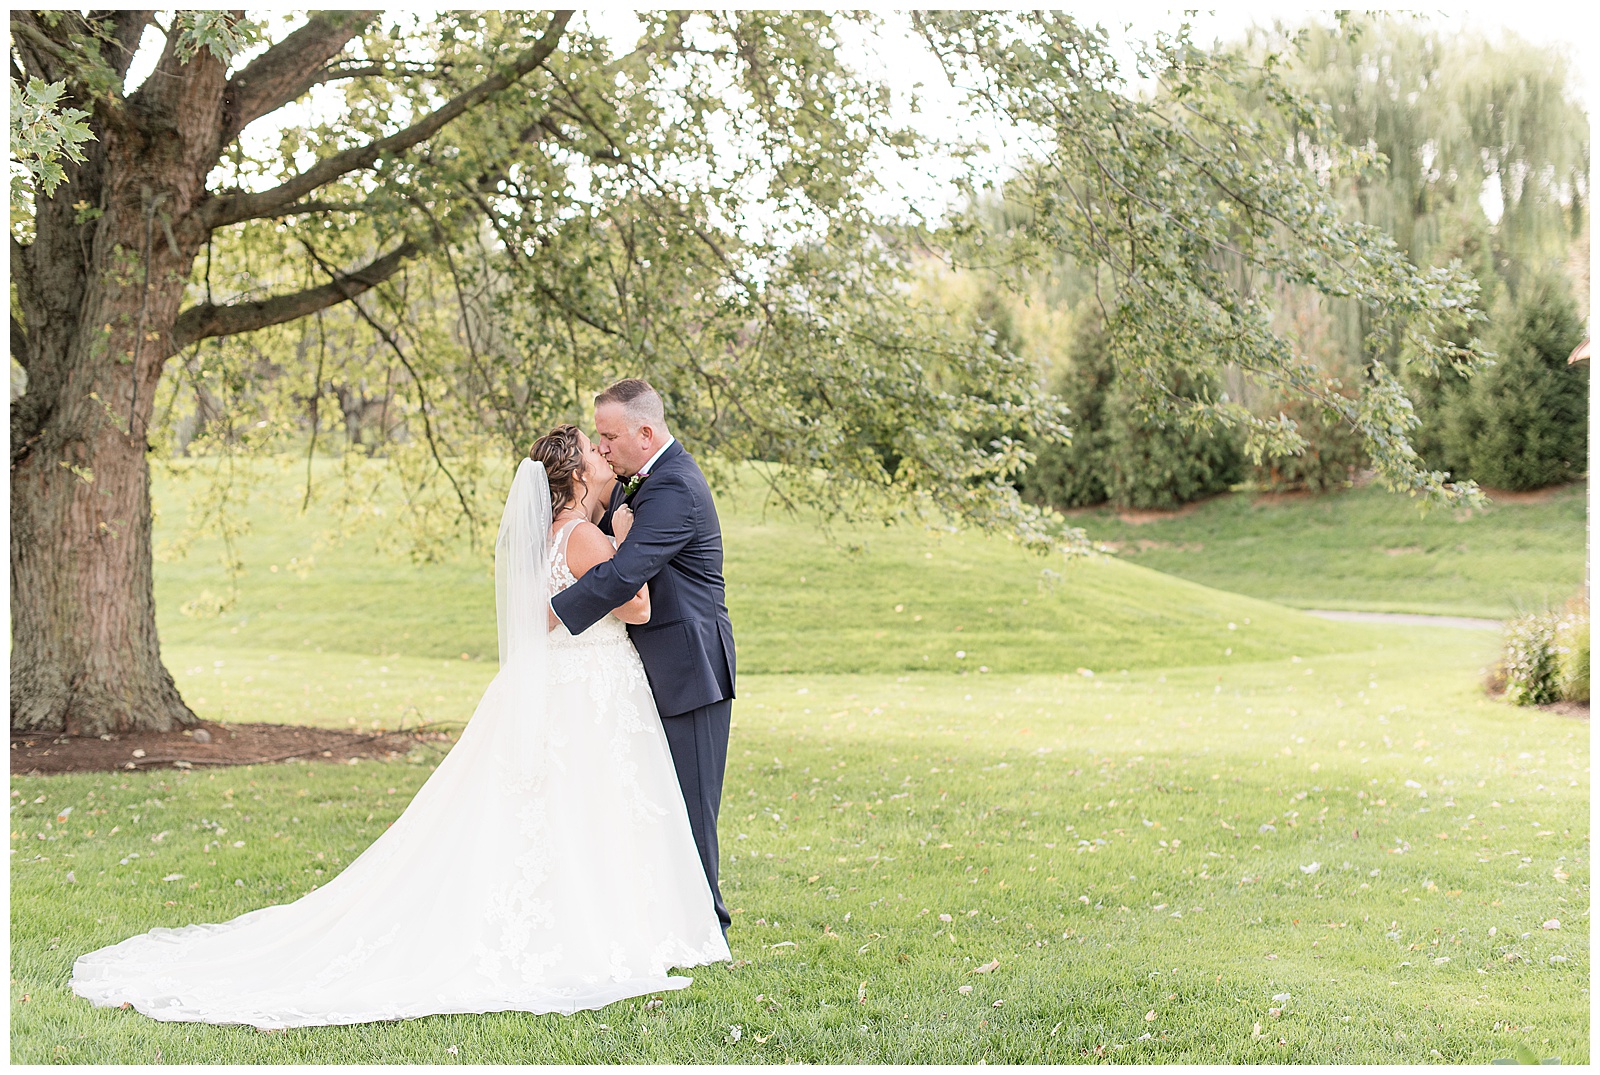 groom wrapping arms around bride as they share a kiss under large tree